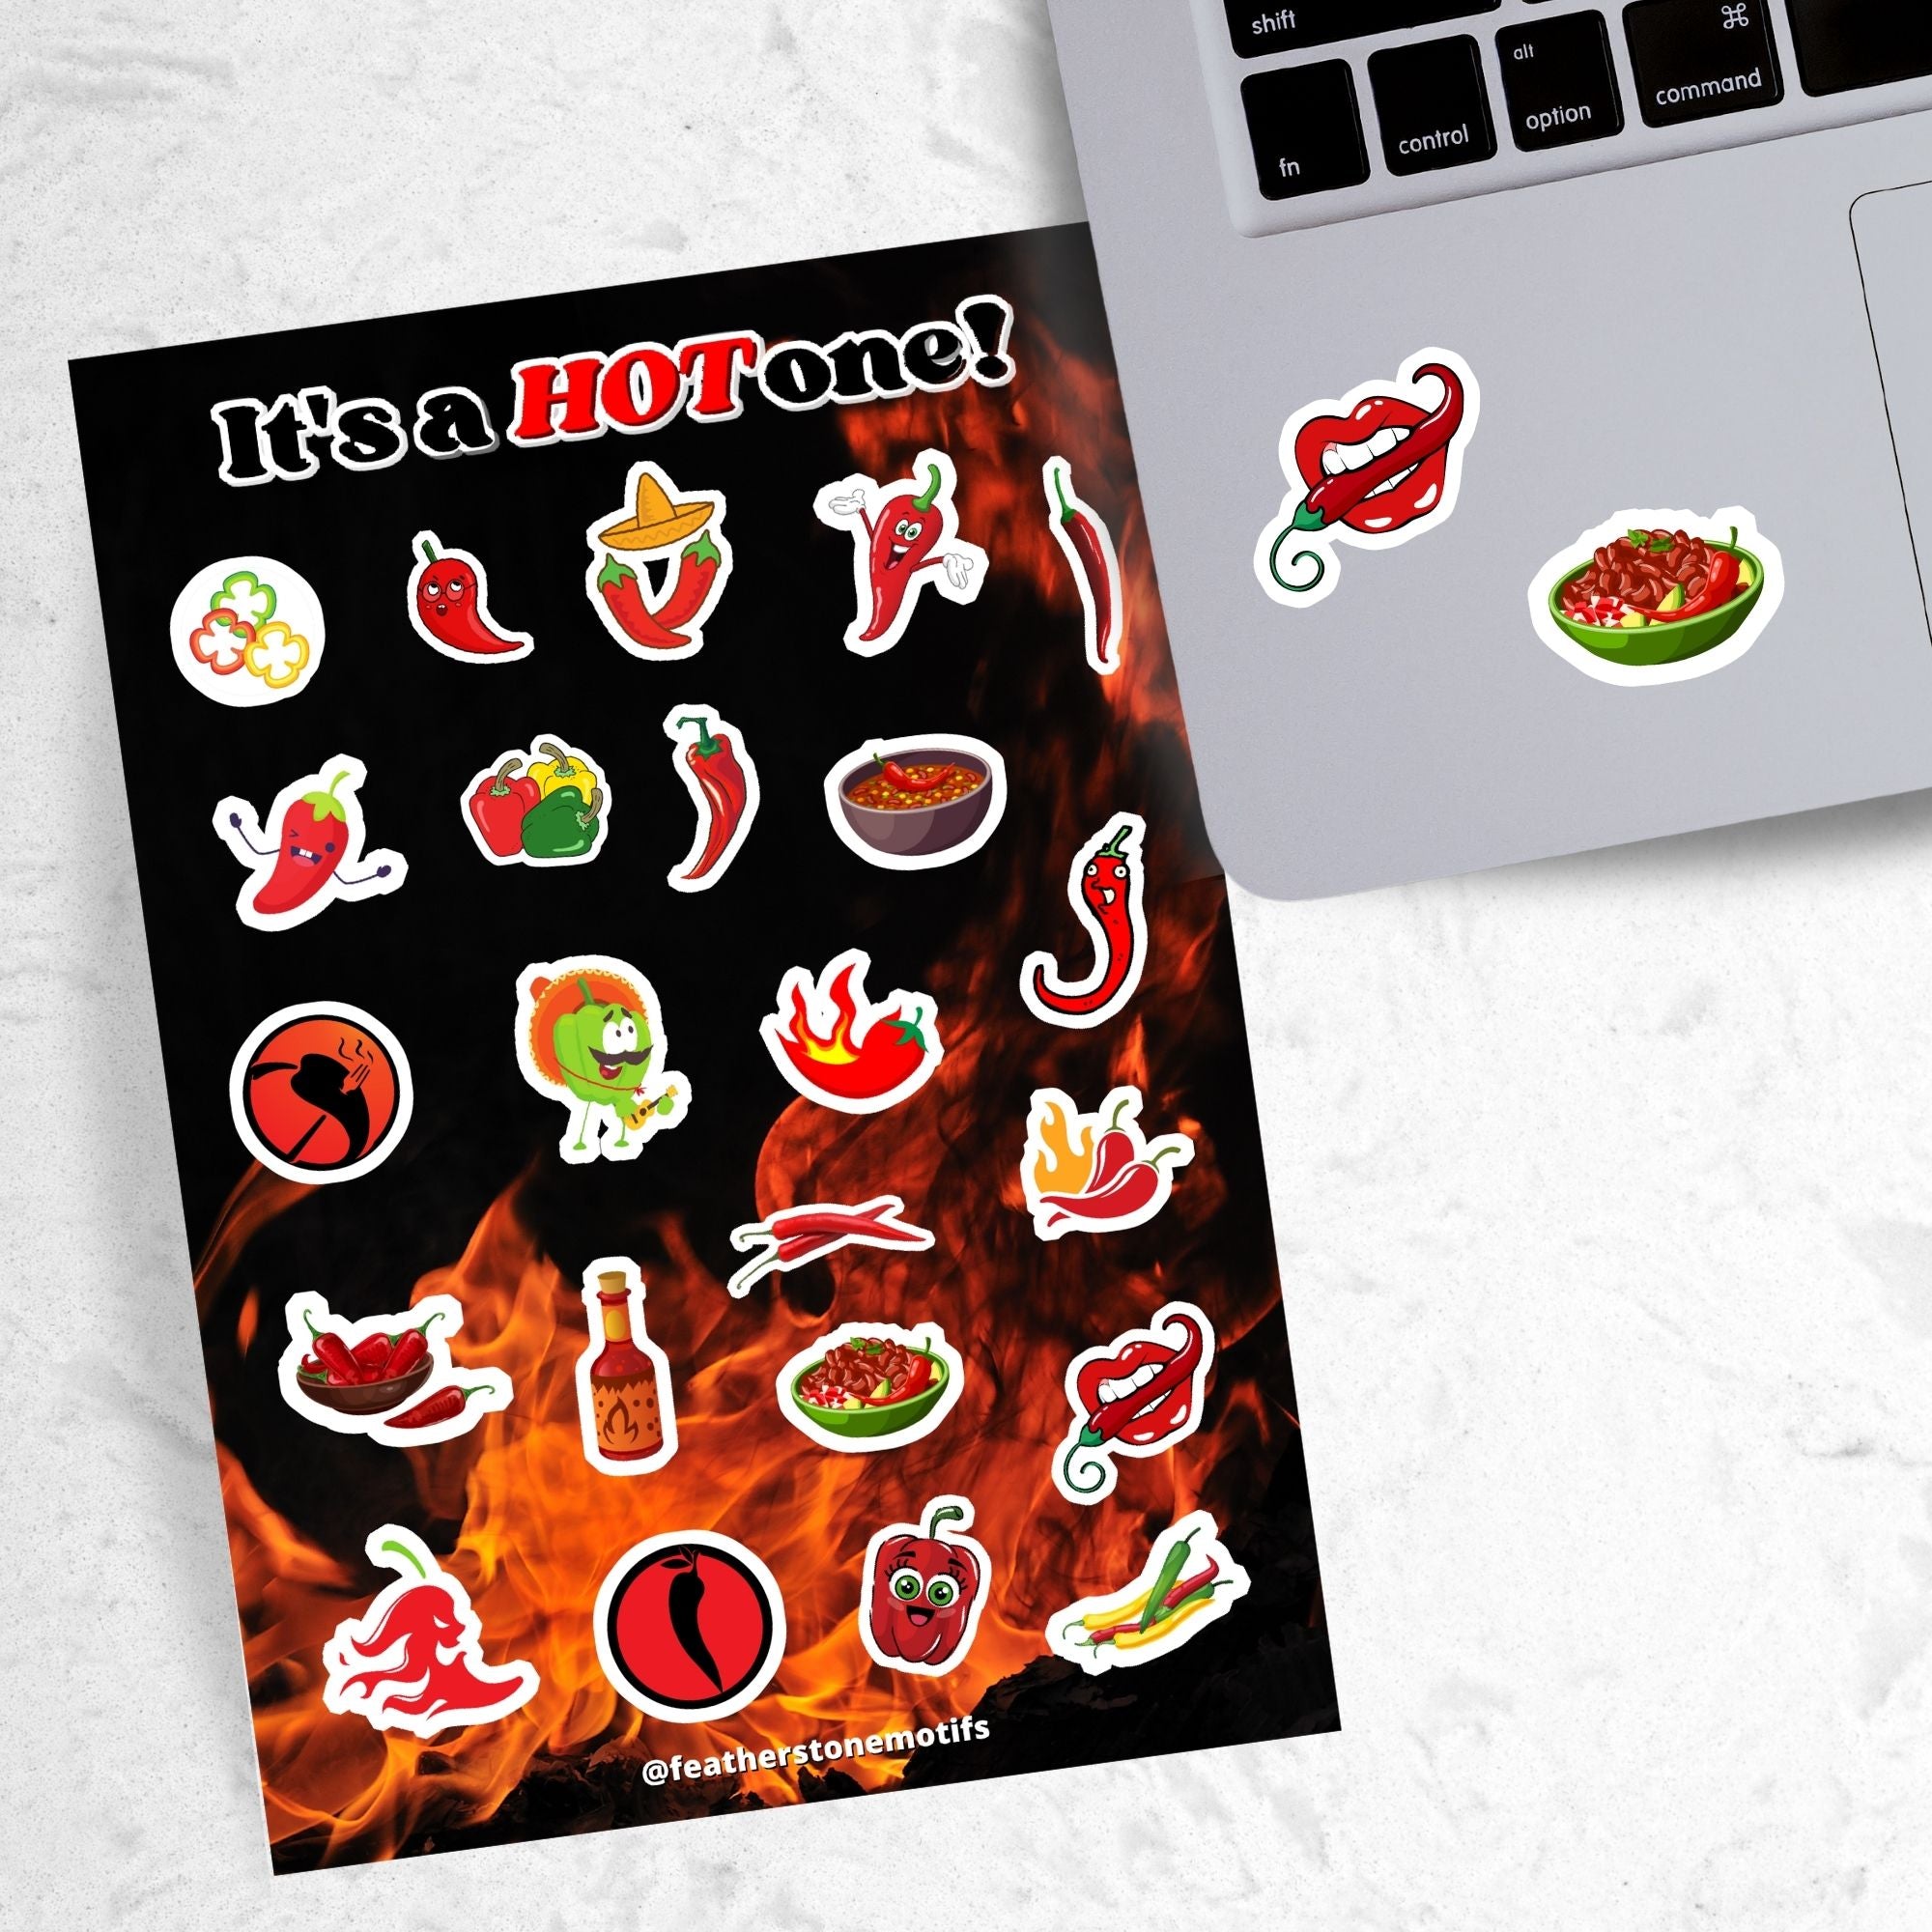 Hot peppers, hot salsa, and hot sauce; this sticker sheet is filled with stickers to celebrate everything spicy! This image shows the sticker sheet next to an open laptop with stickers of a mouth holding a pepper, and a bowl of spicy salsa, applied below the keyboard.